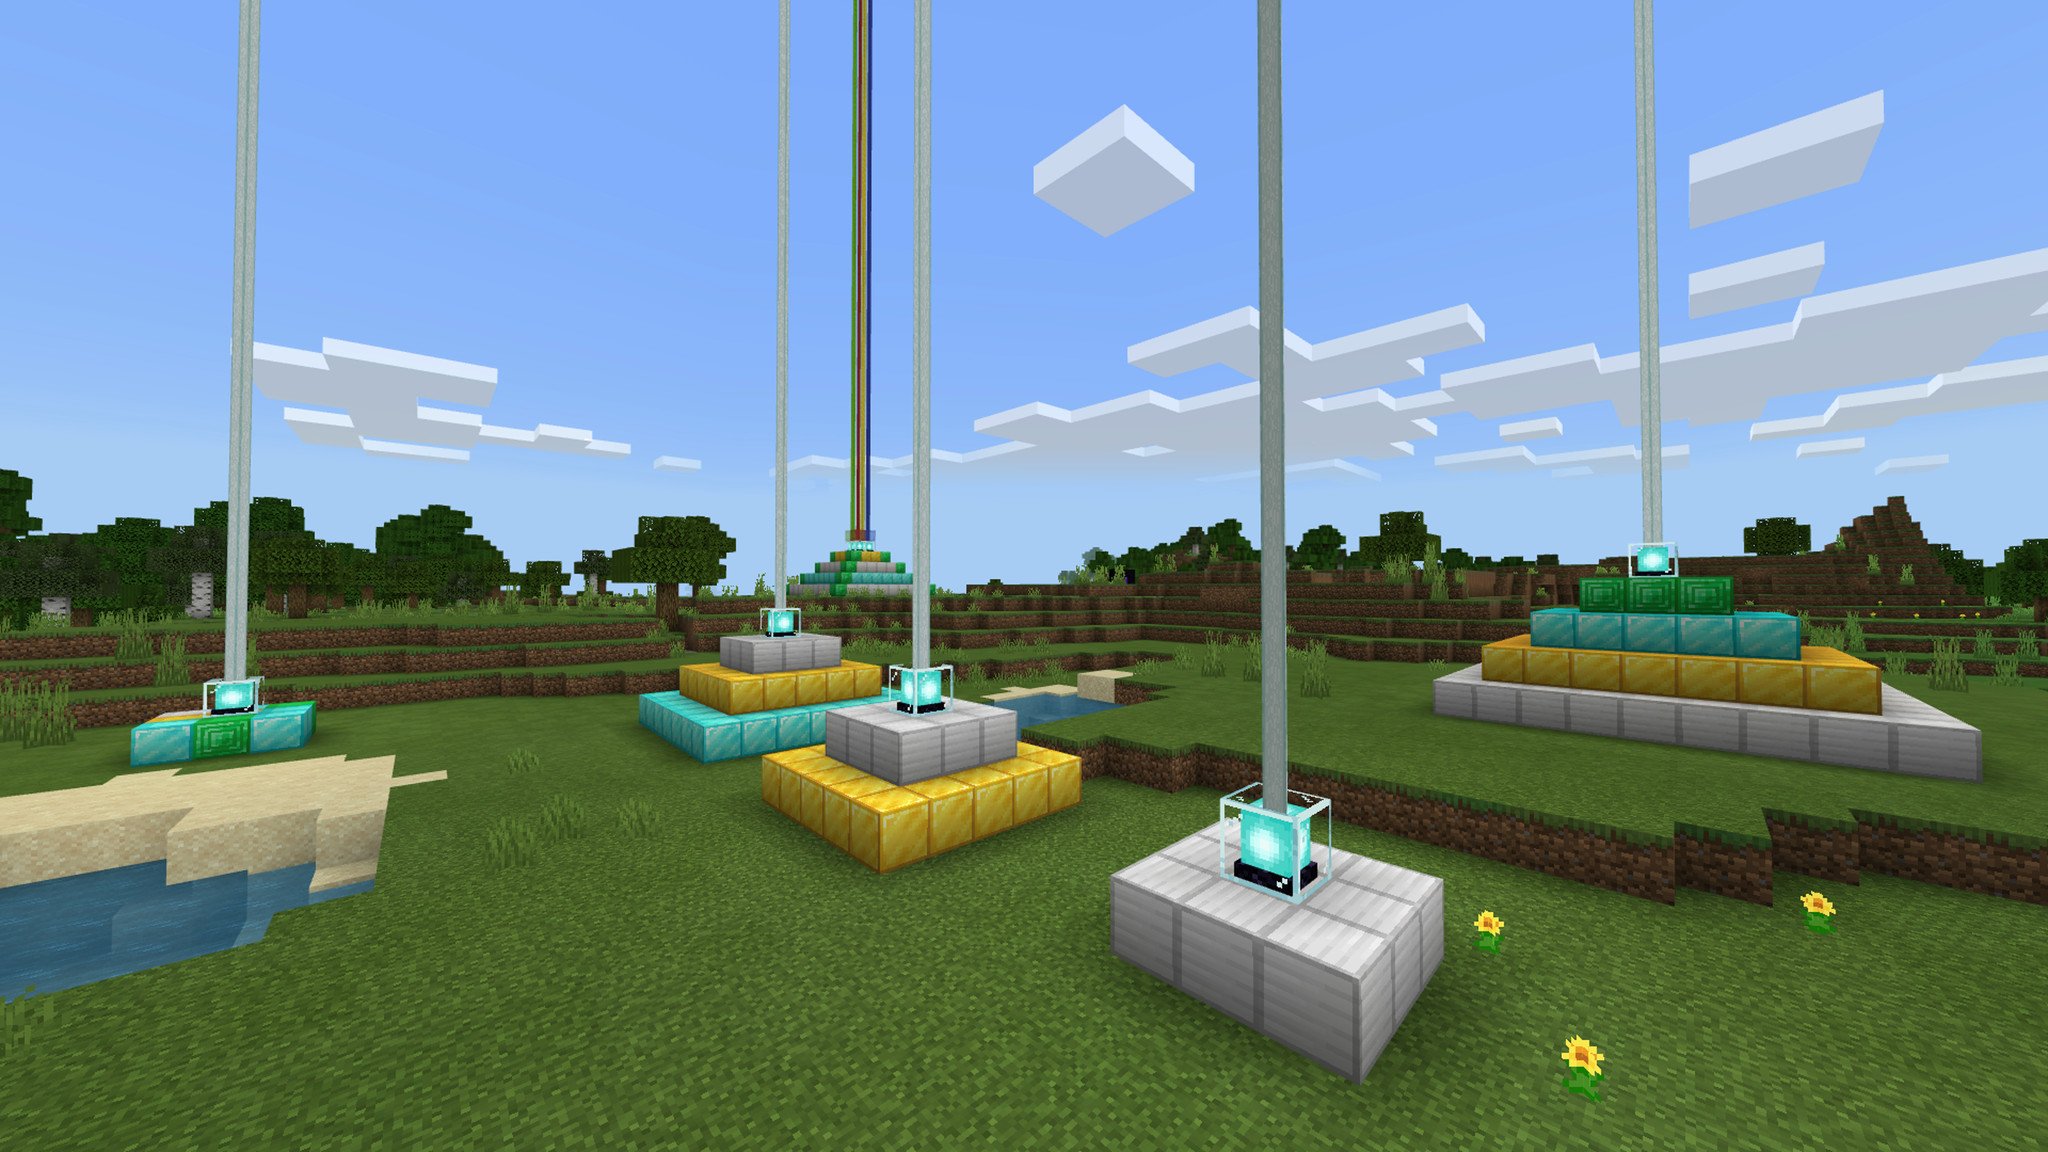 Making a Beacon in Minecraft